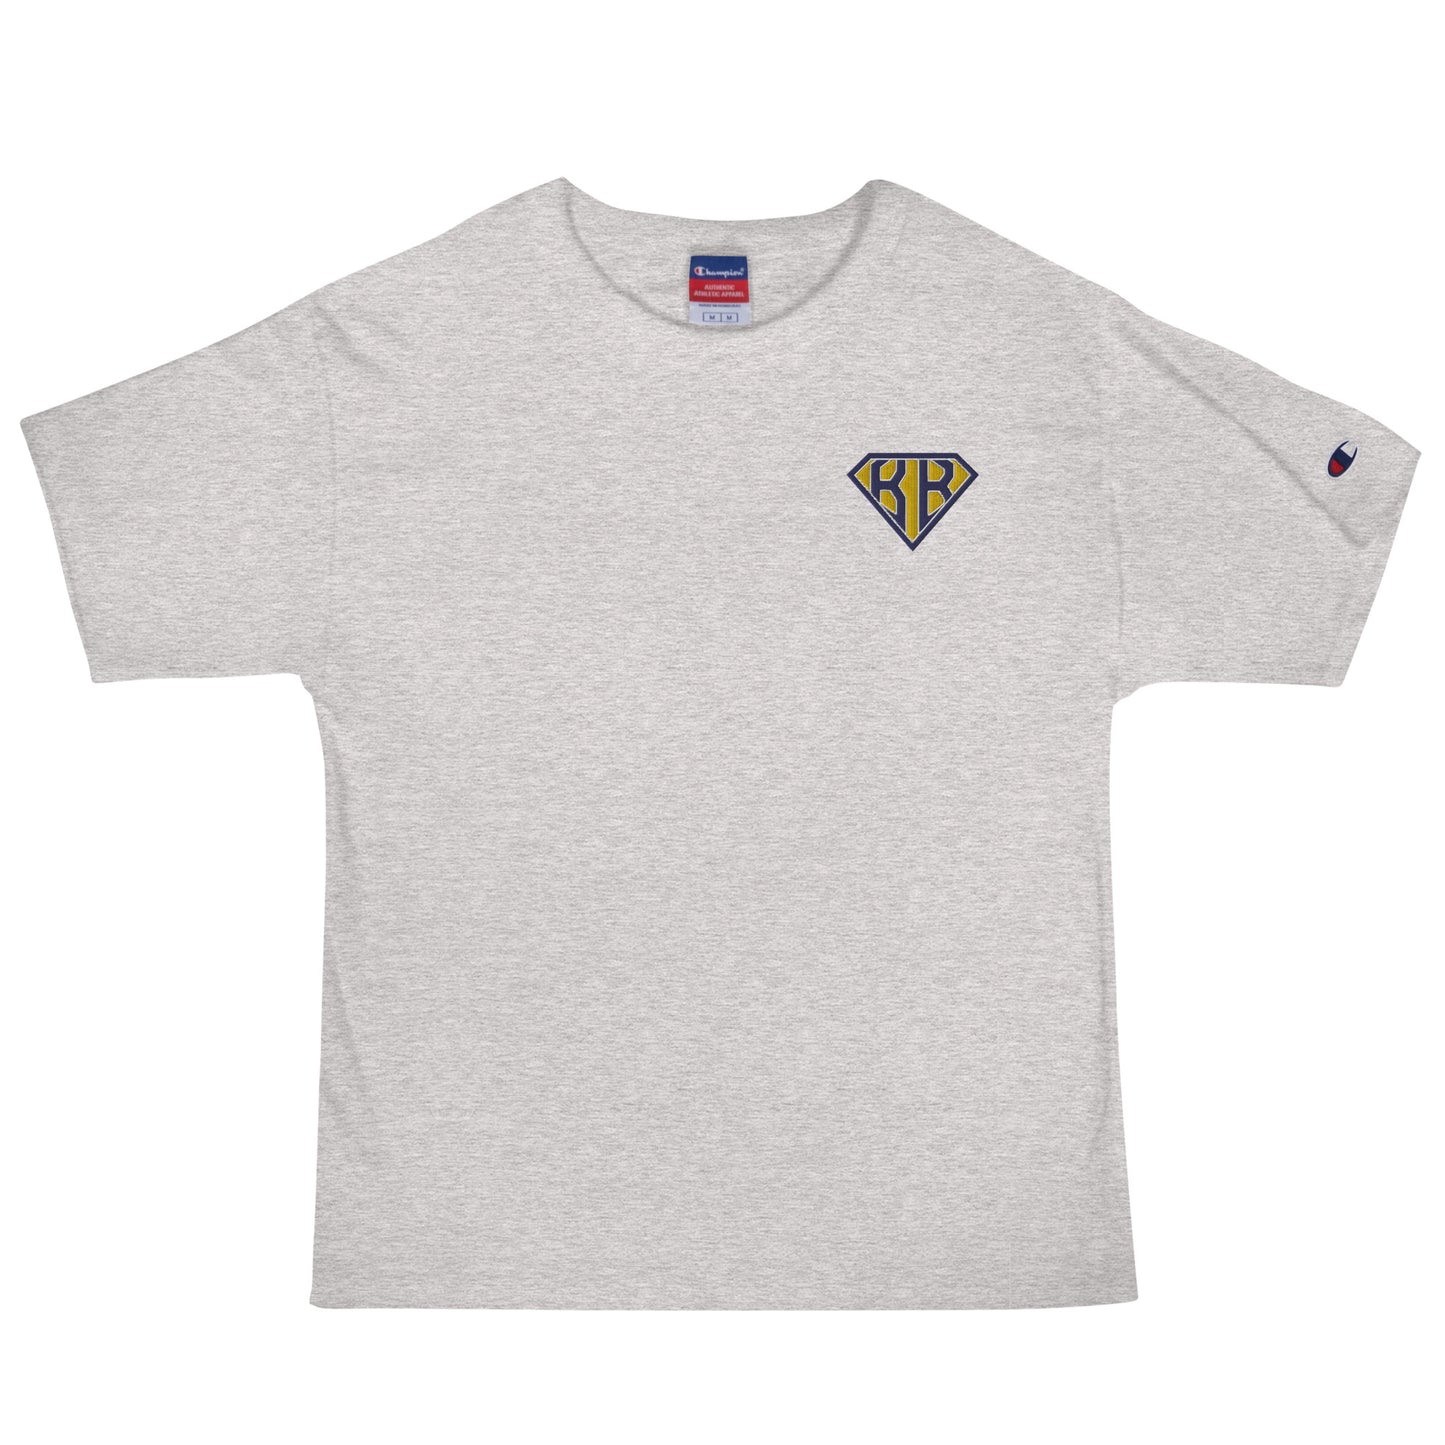 BB Embroidered Men's Champion T-Shirt